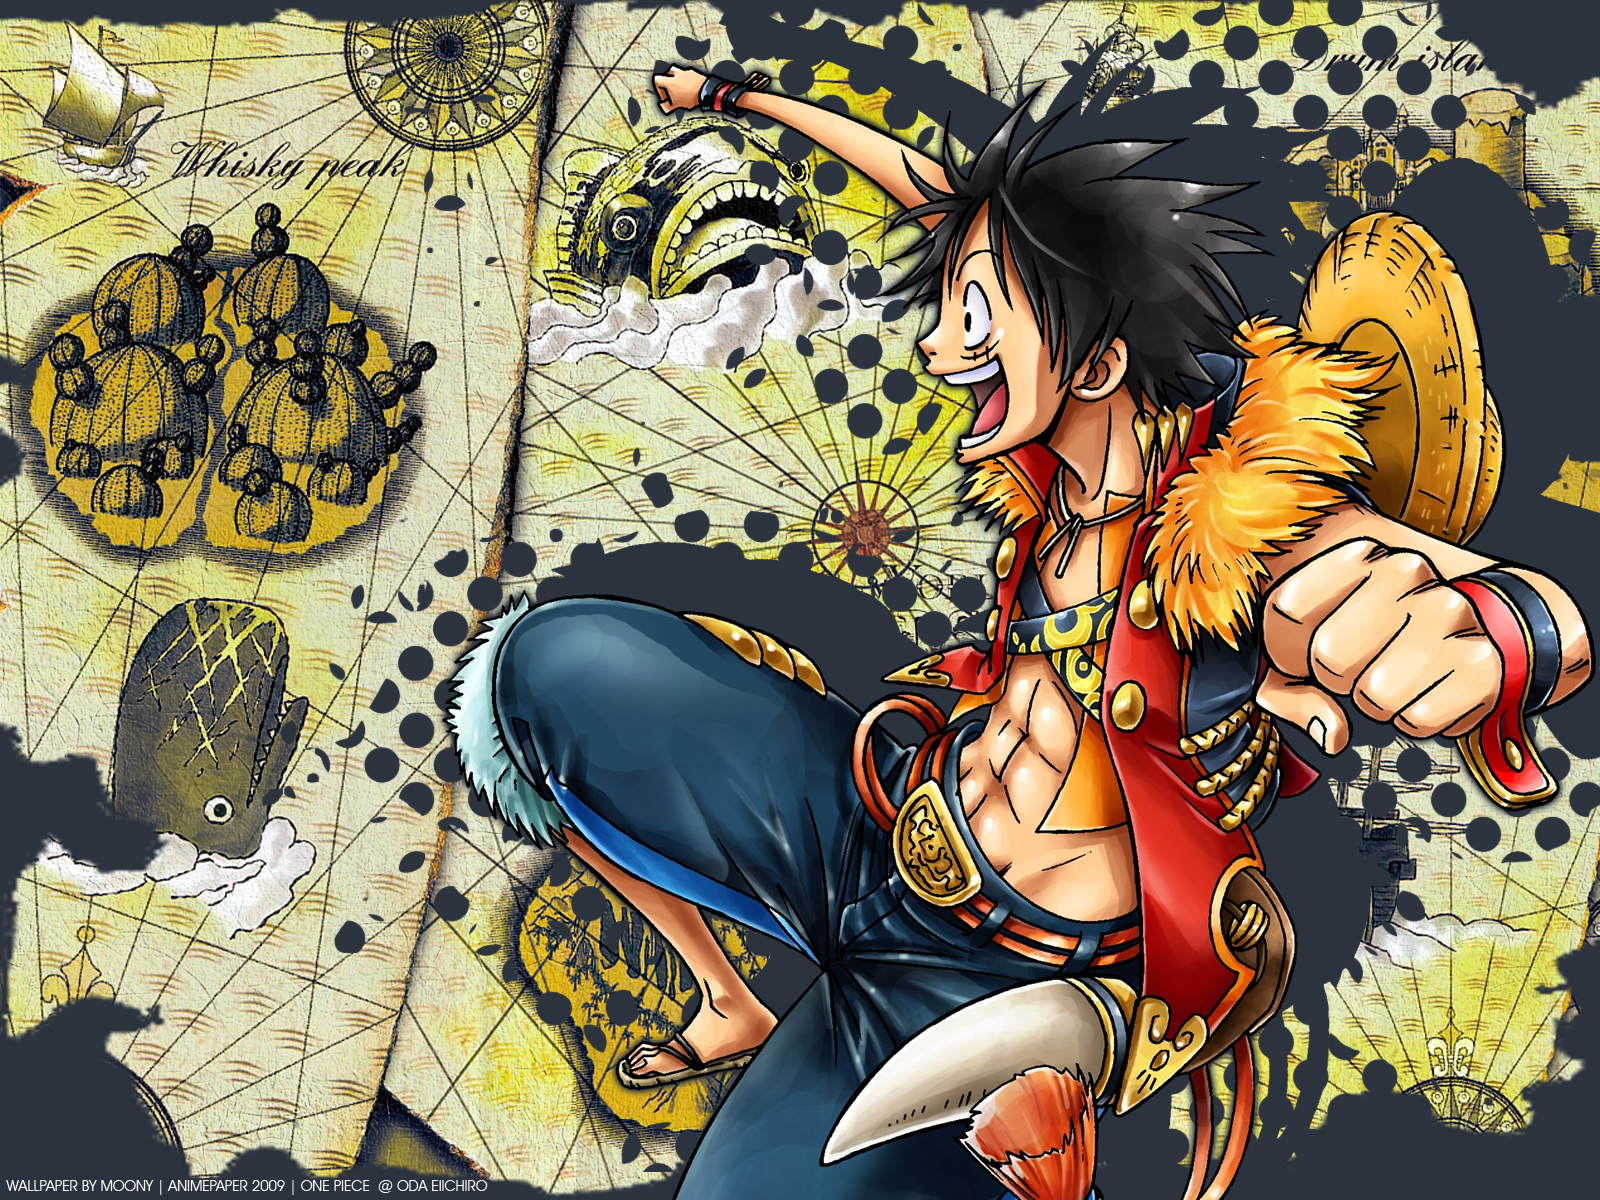 Colorful One Piece map featuring Monkey D. Luffy from the popular anime series.